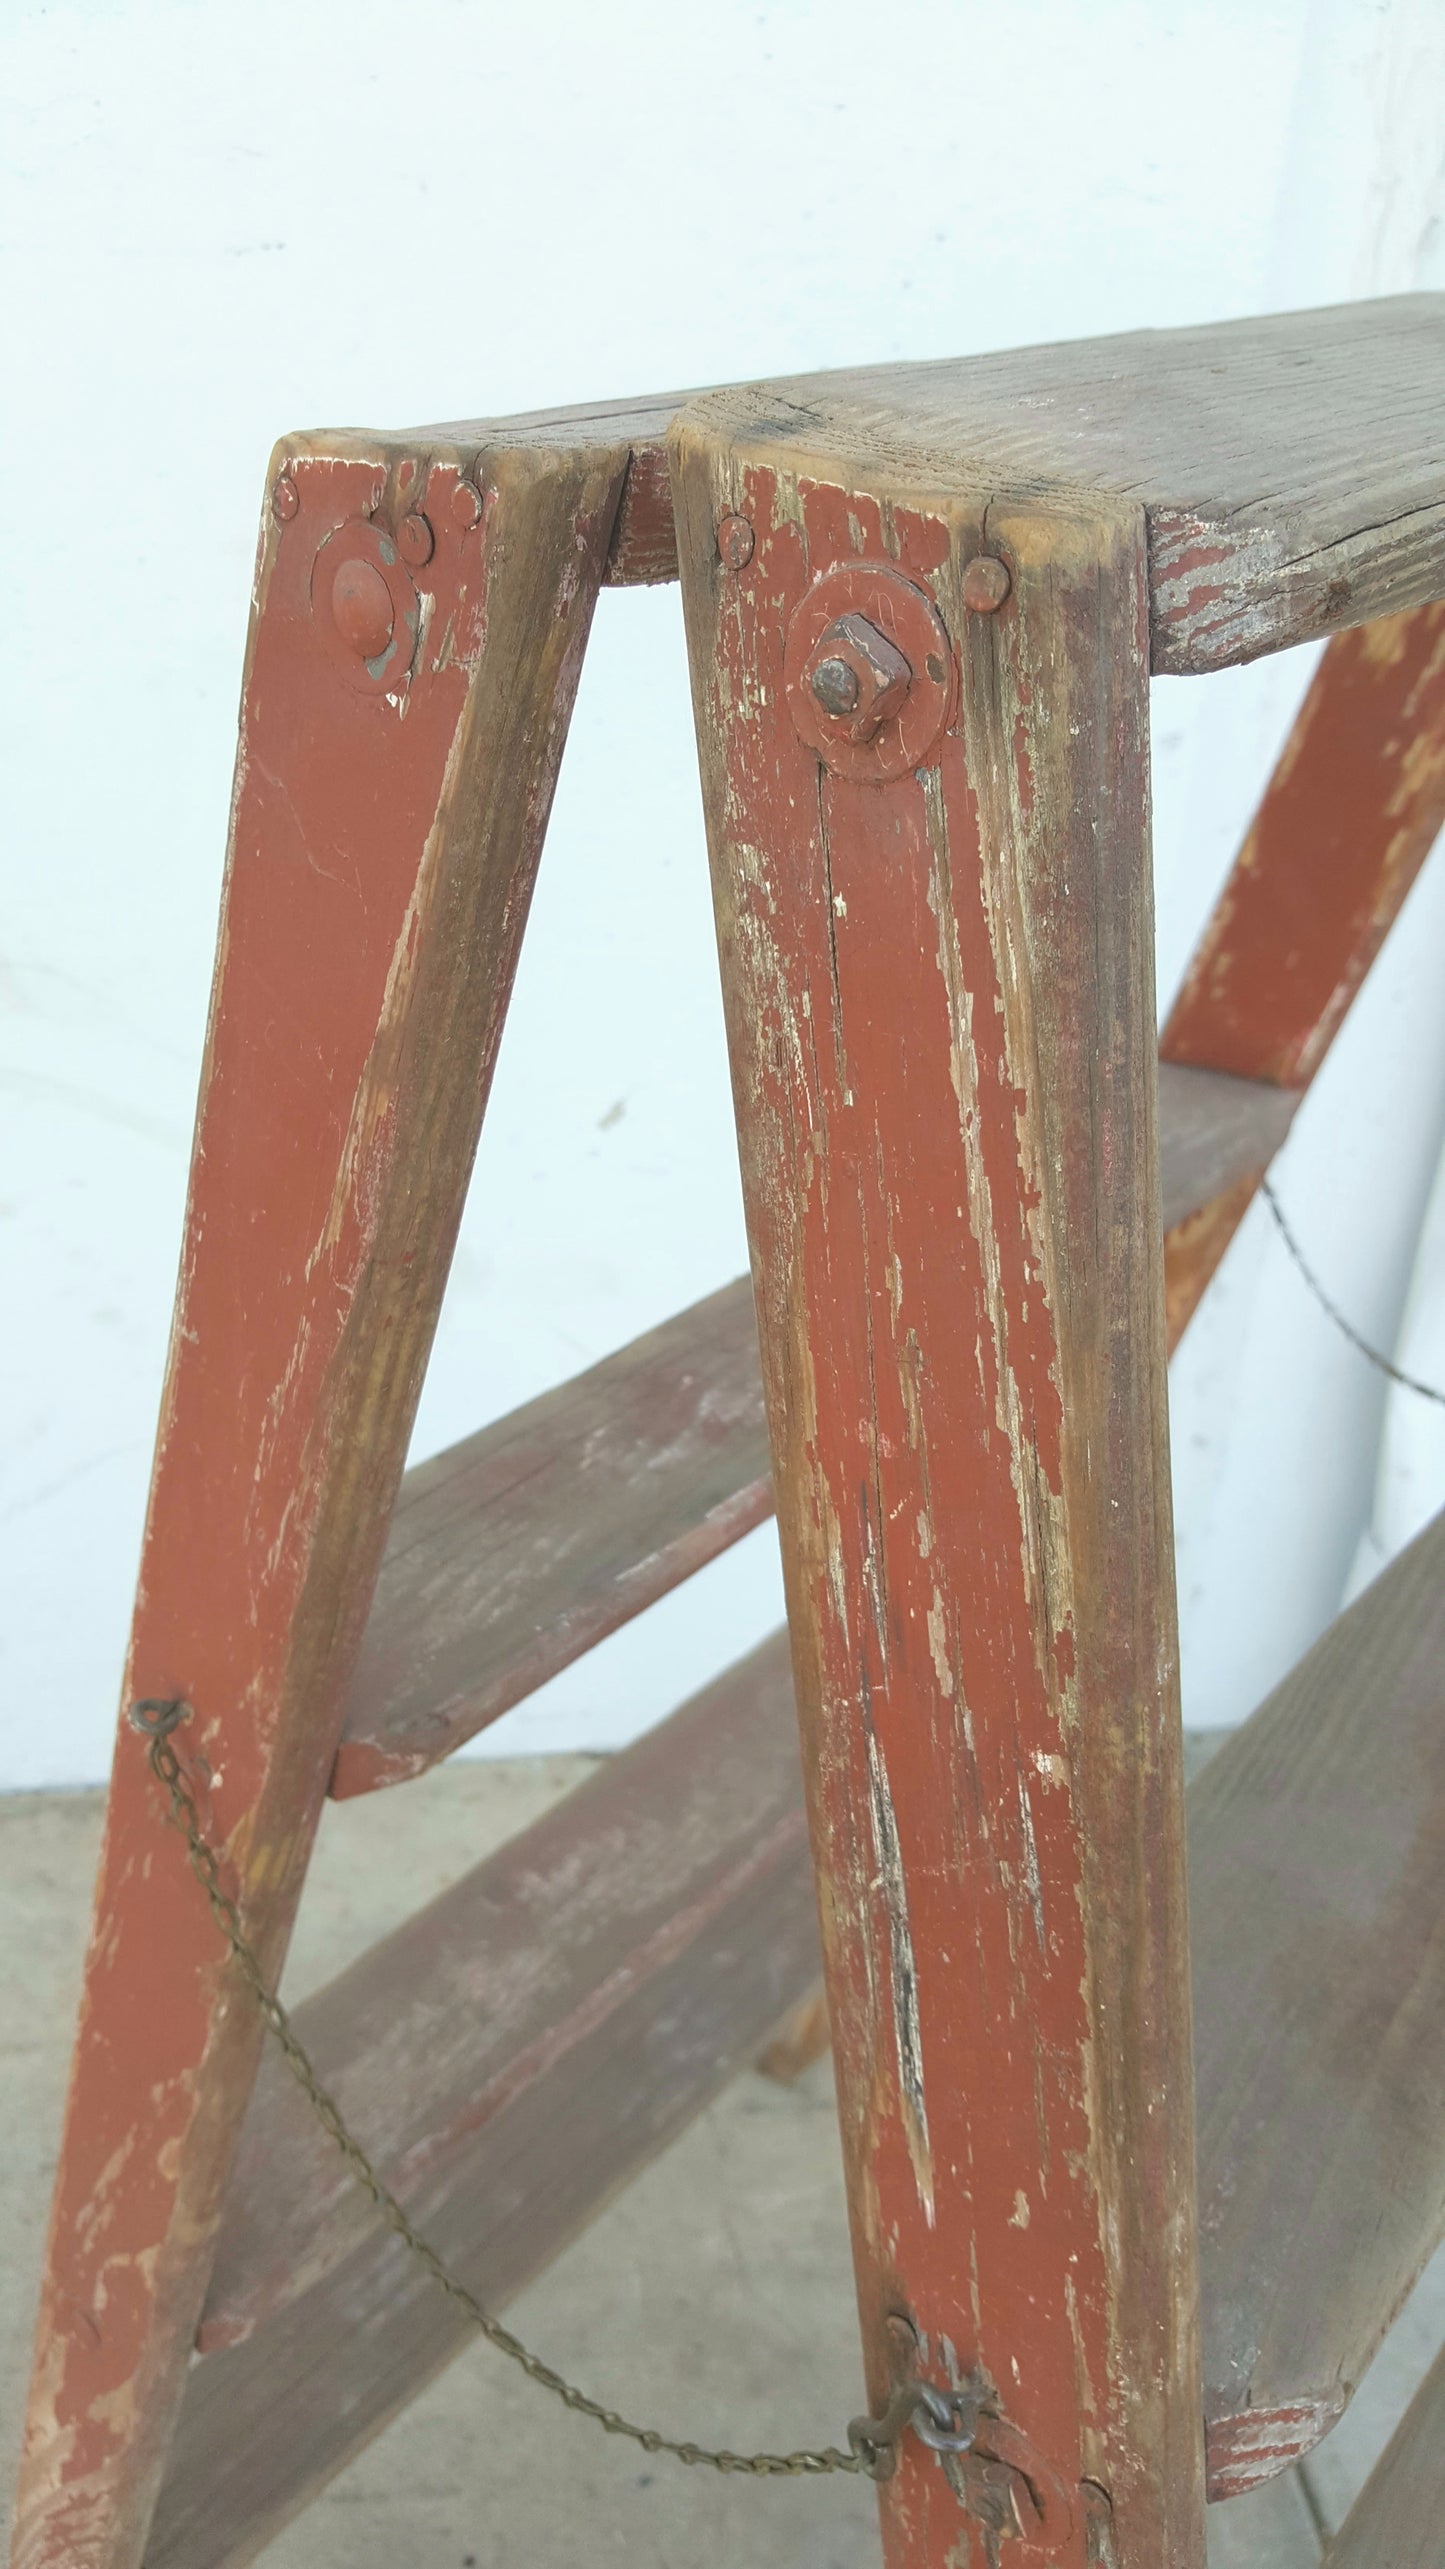 Small Wooden Ladder